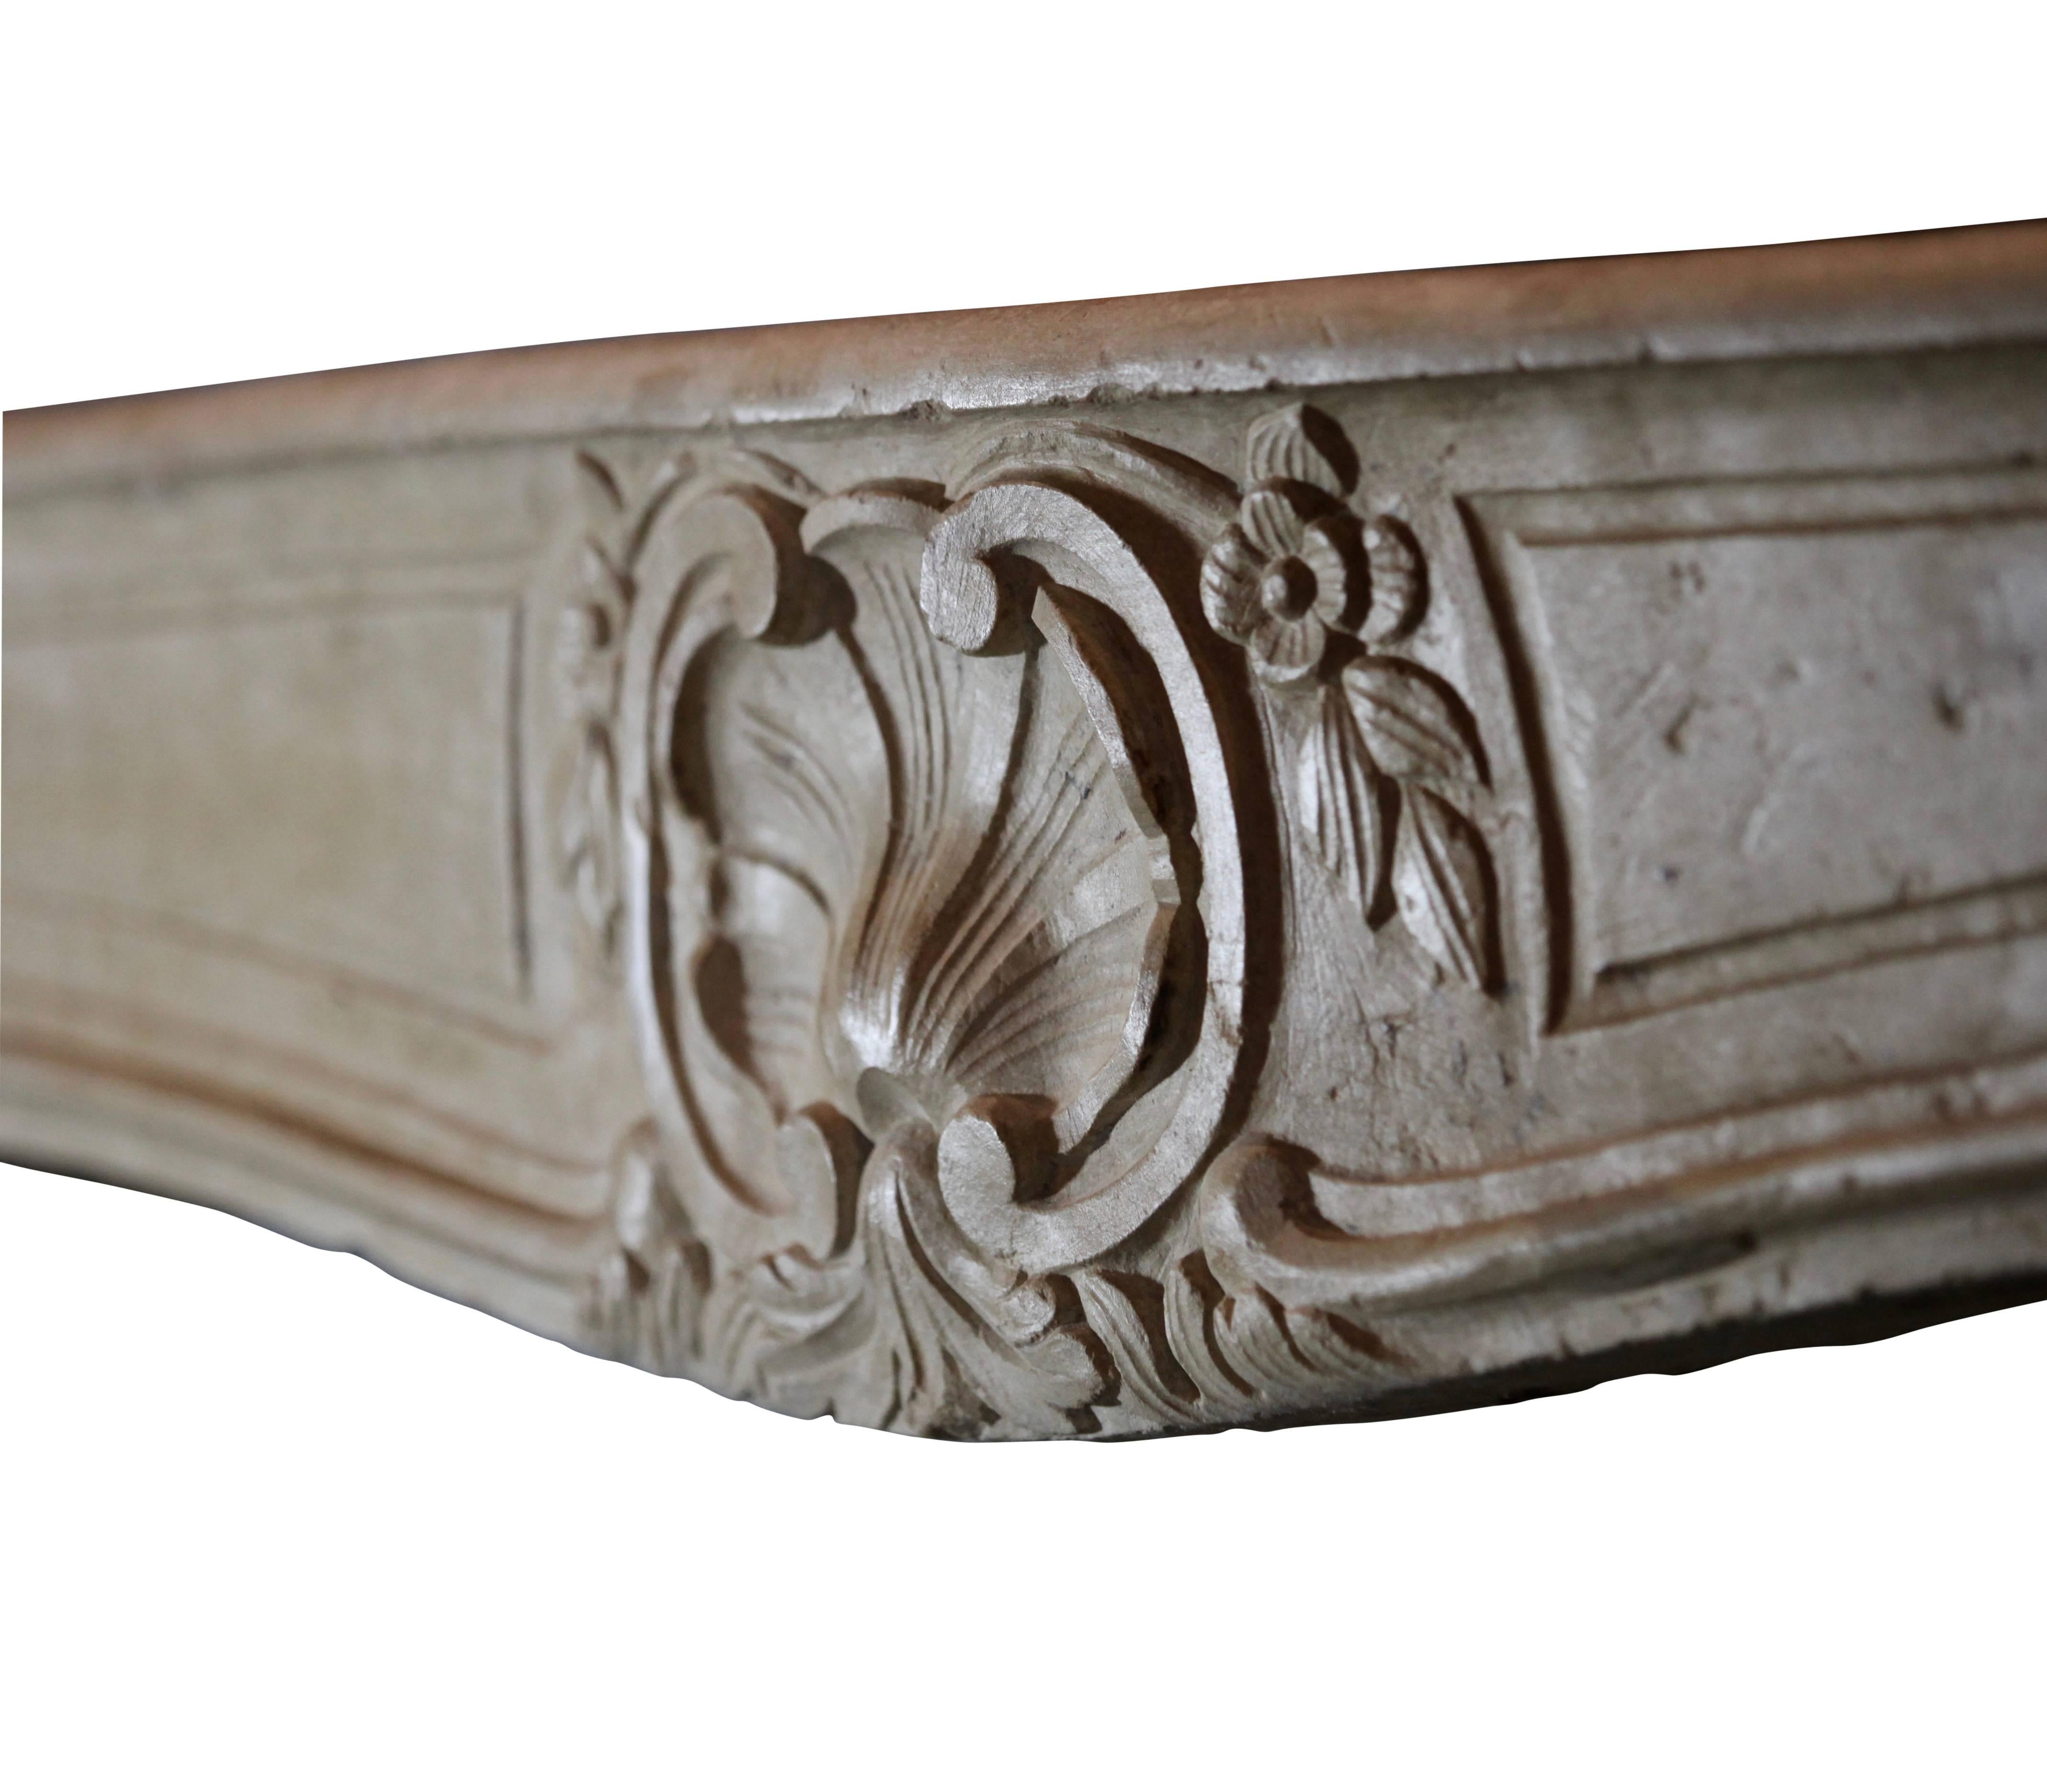 This fine limestone original antique fireplace surround has grand proportions. The limestone is reflecting the light and has a silky touch. Left jamb had a restoration. A perfect fit for a French style interior design.
Measures:
166 cm EW